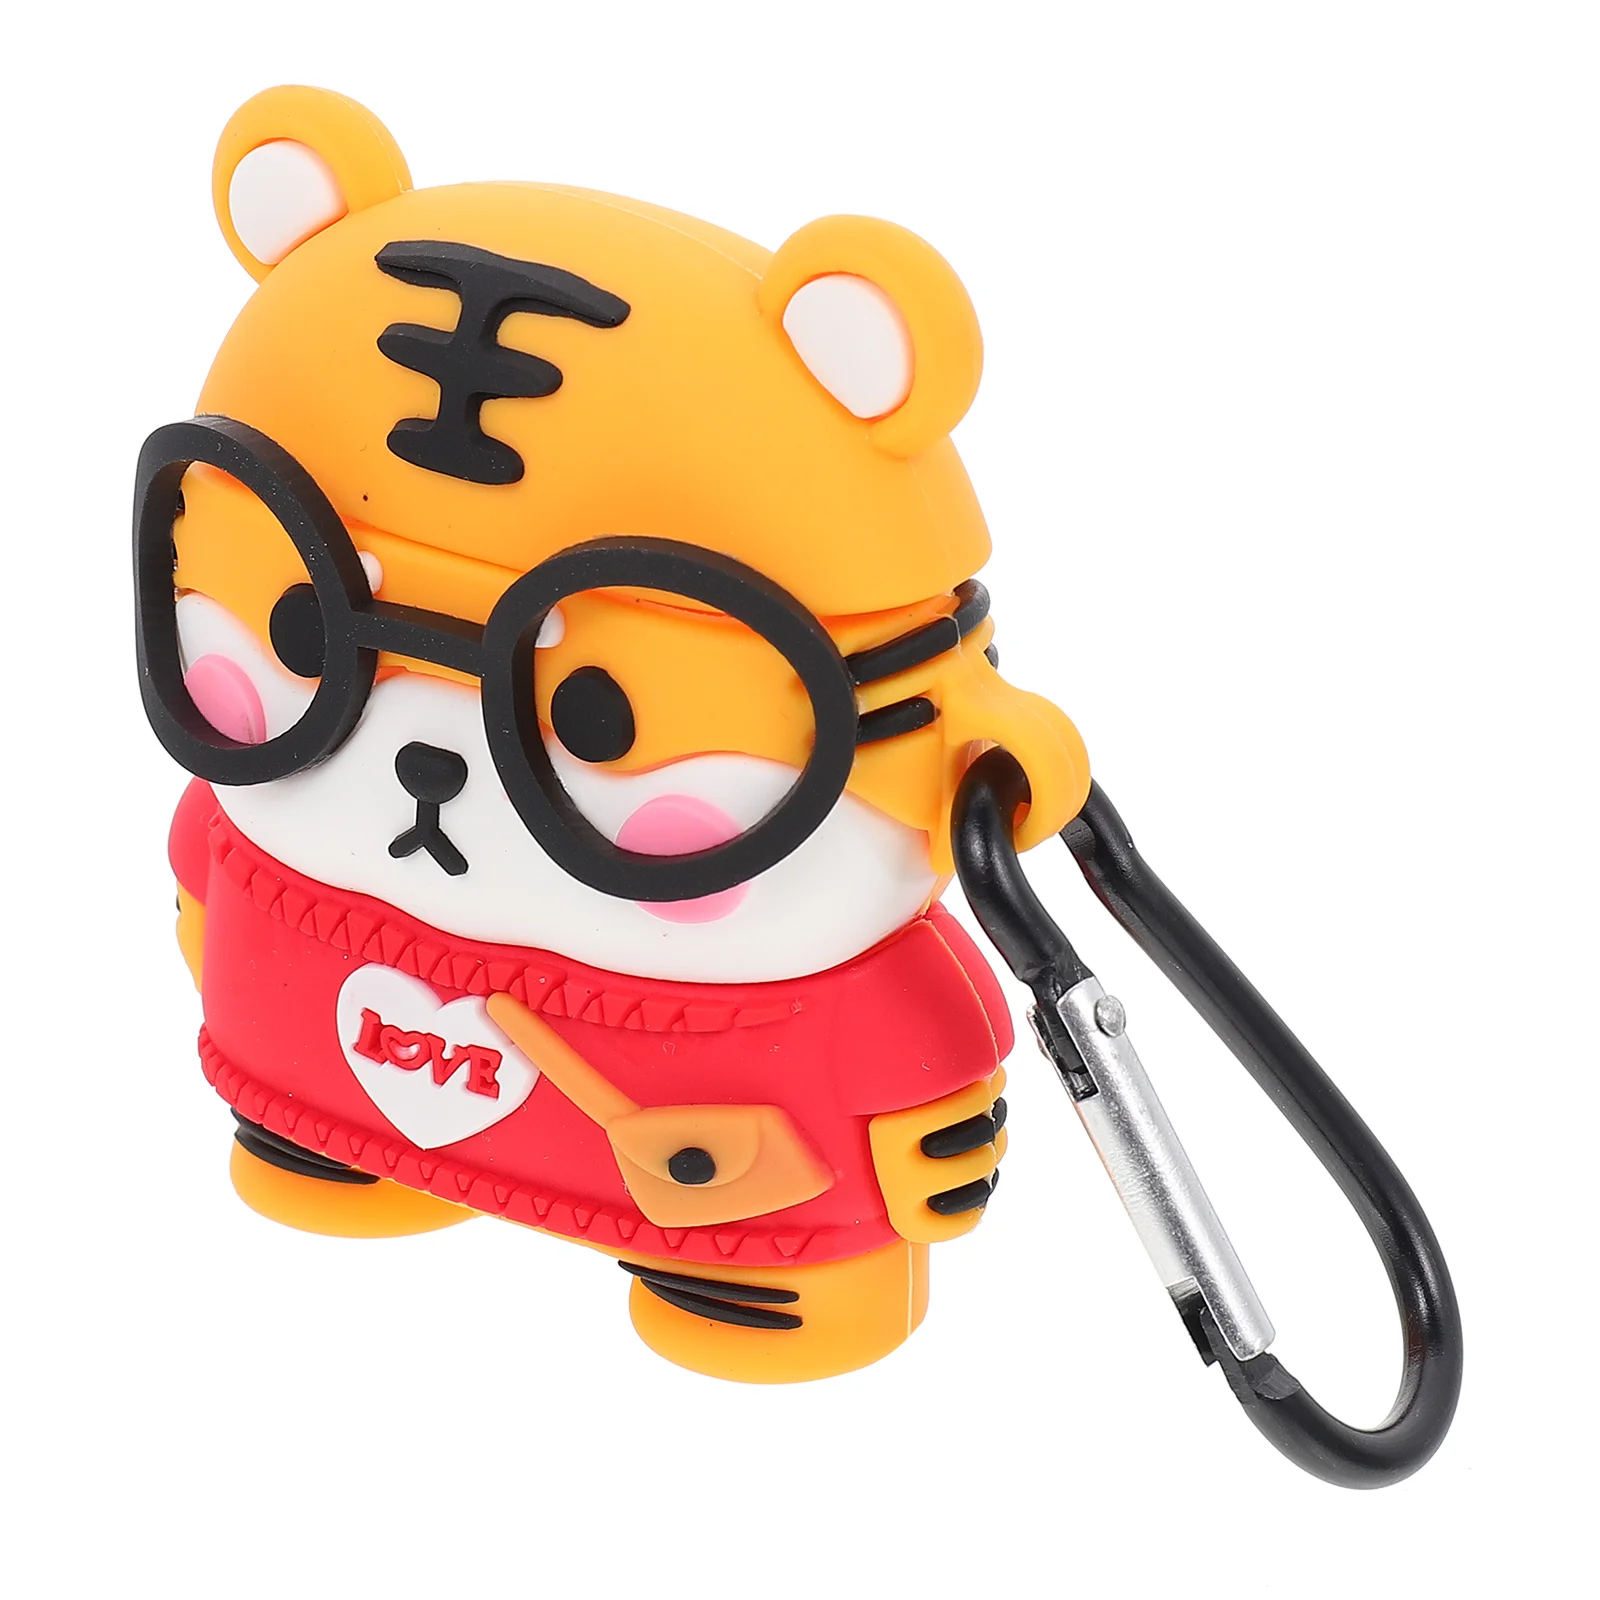 

Case Earphone Earbuds Wireless Cover Box Carrying Ear Headphone Earbud Holder Hard Bud Pouch Travel Carry Shell Animal